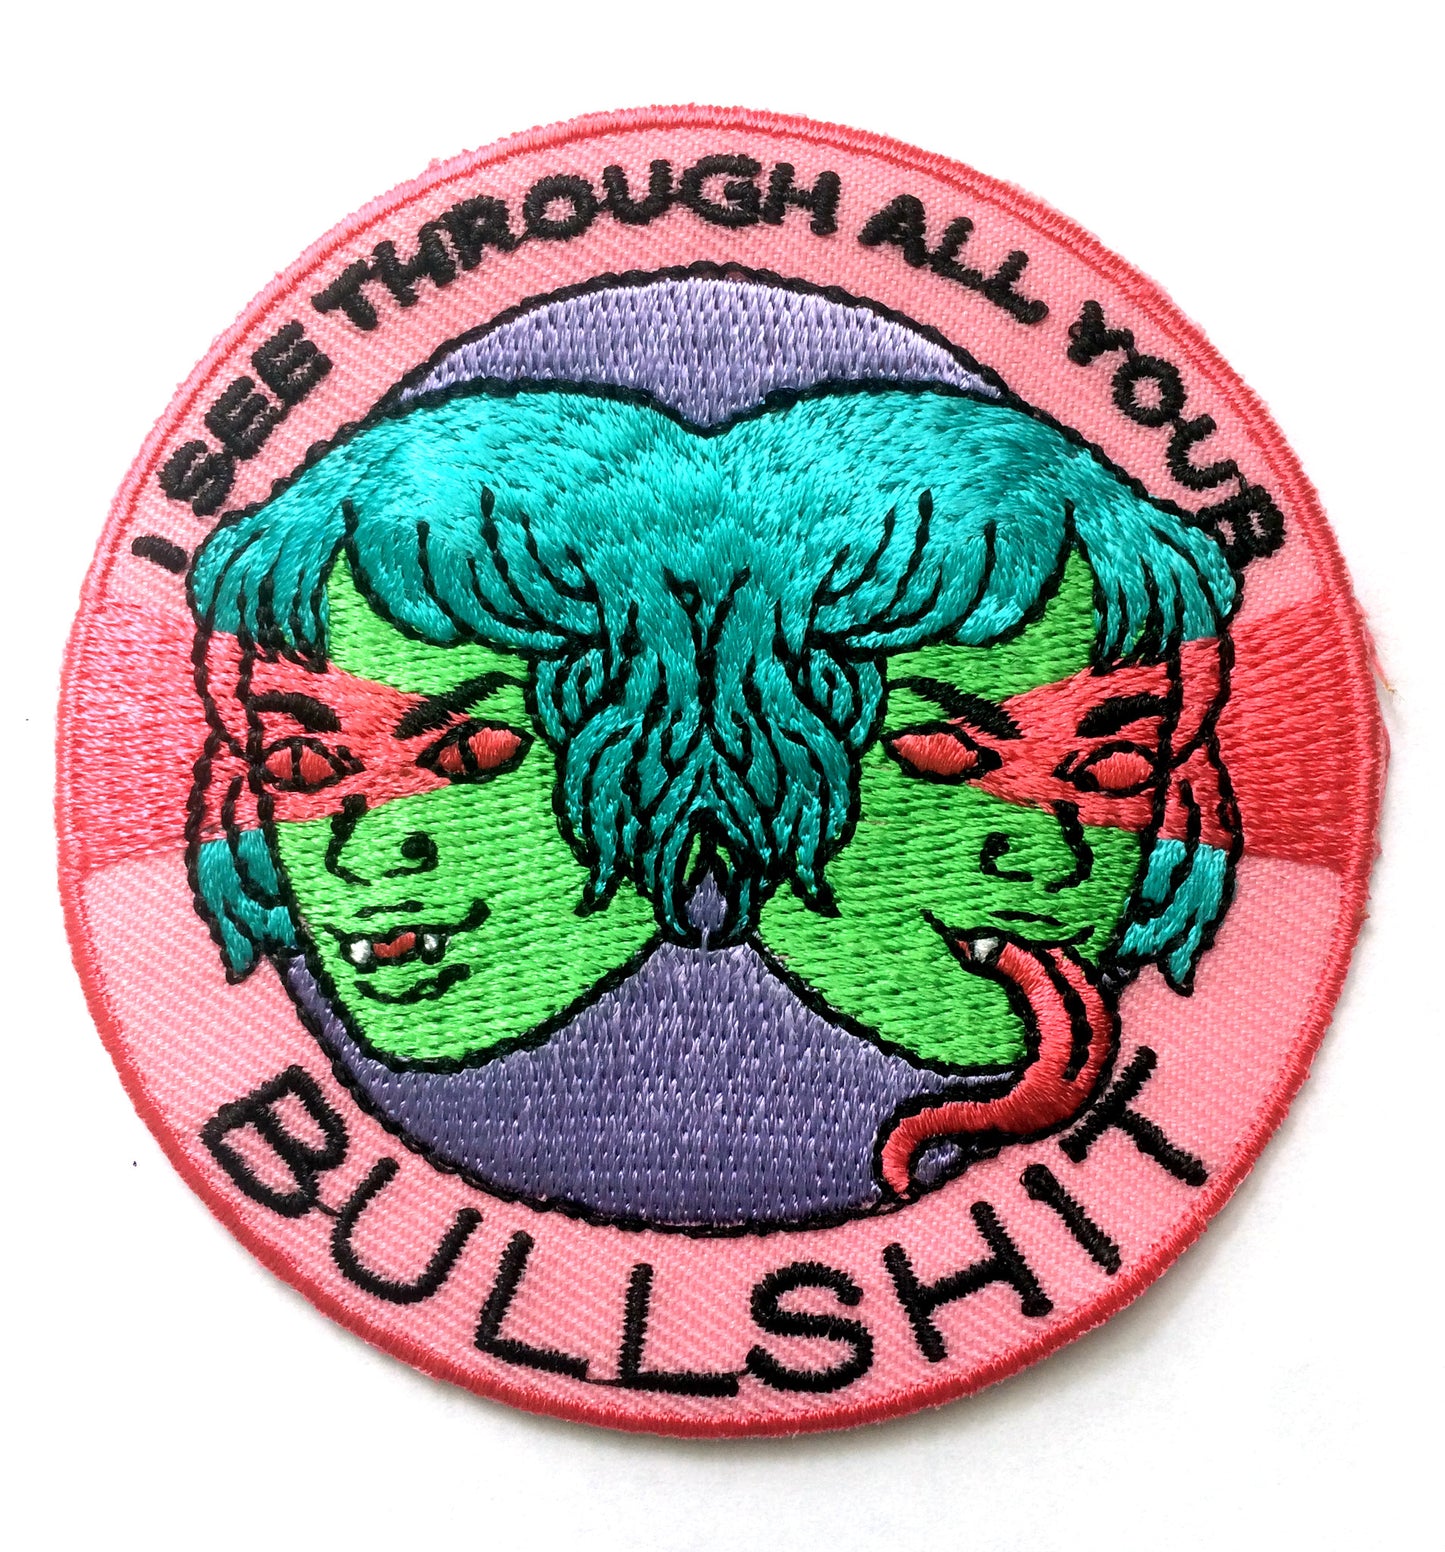 Embroidered Patch: I See Through Your Bullshit by Jenn Woodall